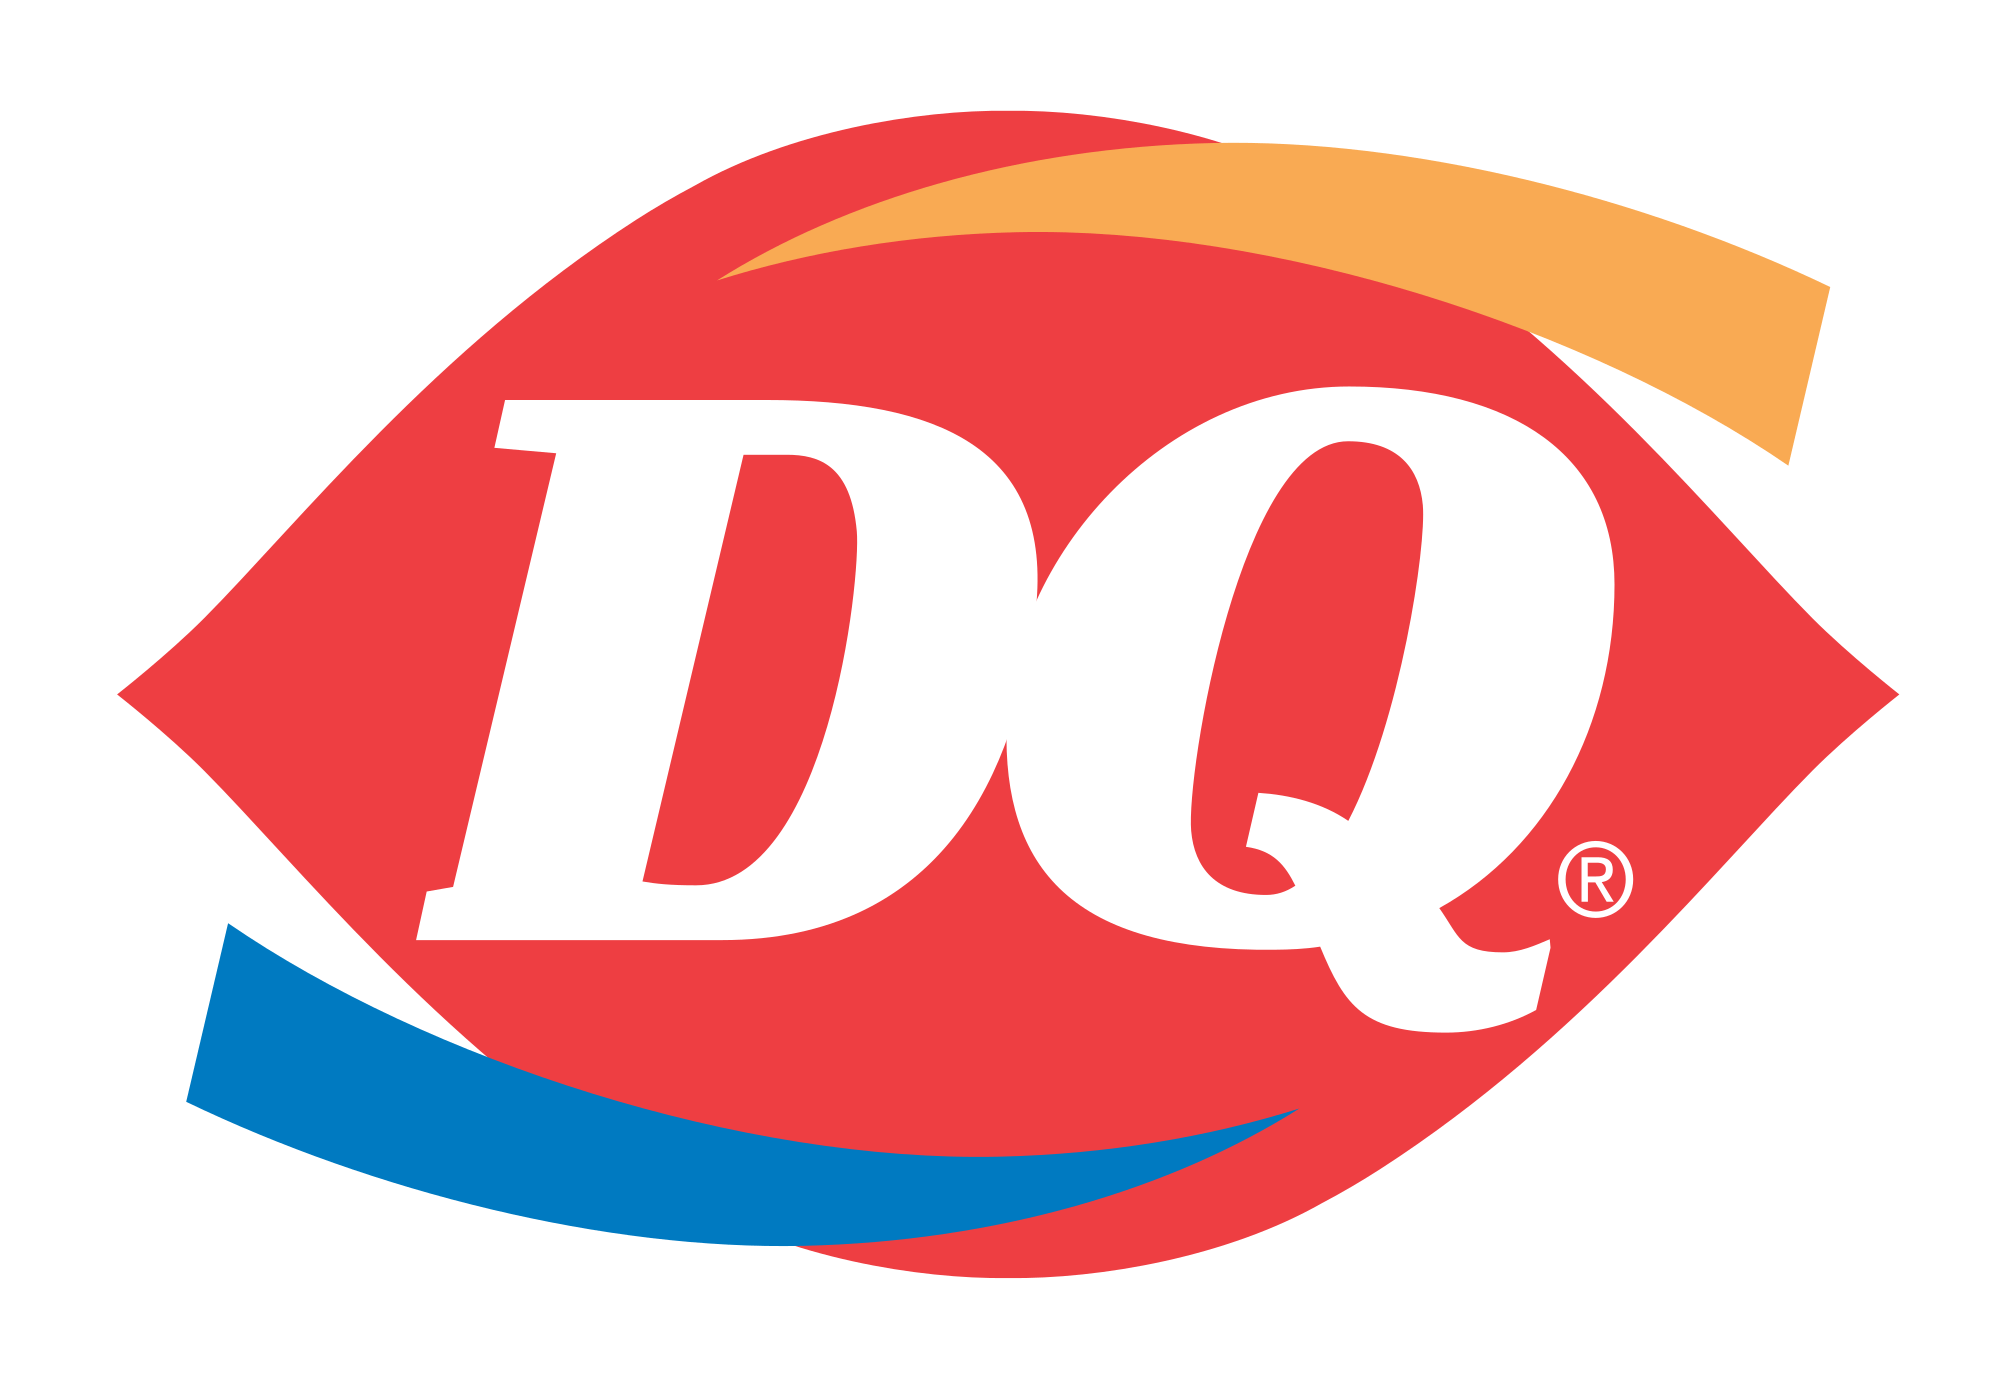 Red Bar Company Logo - Dairy Queen